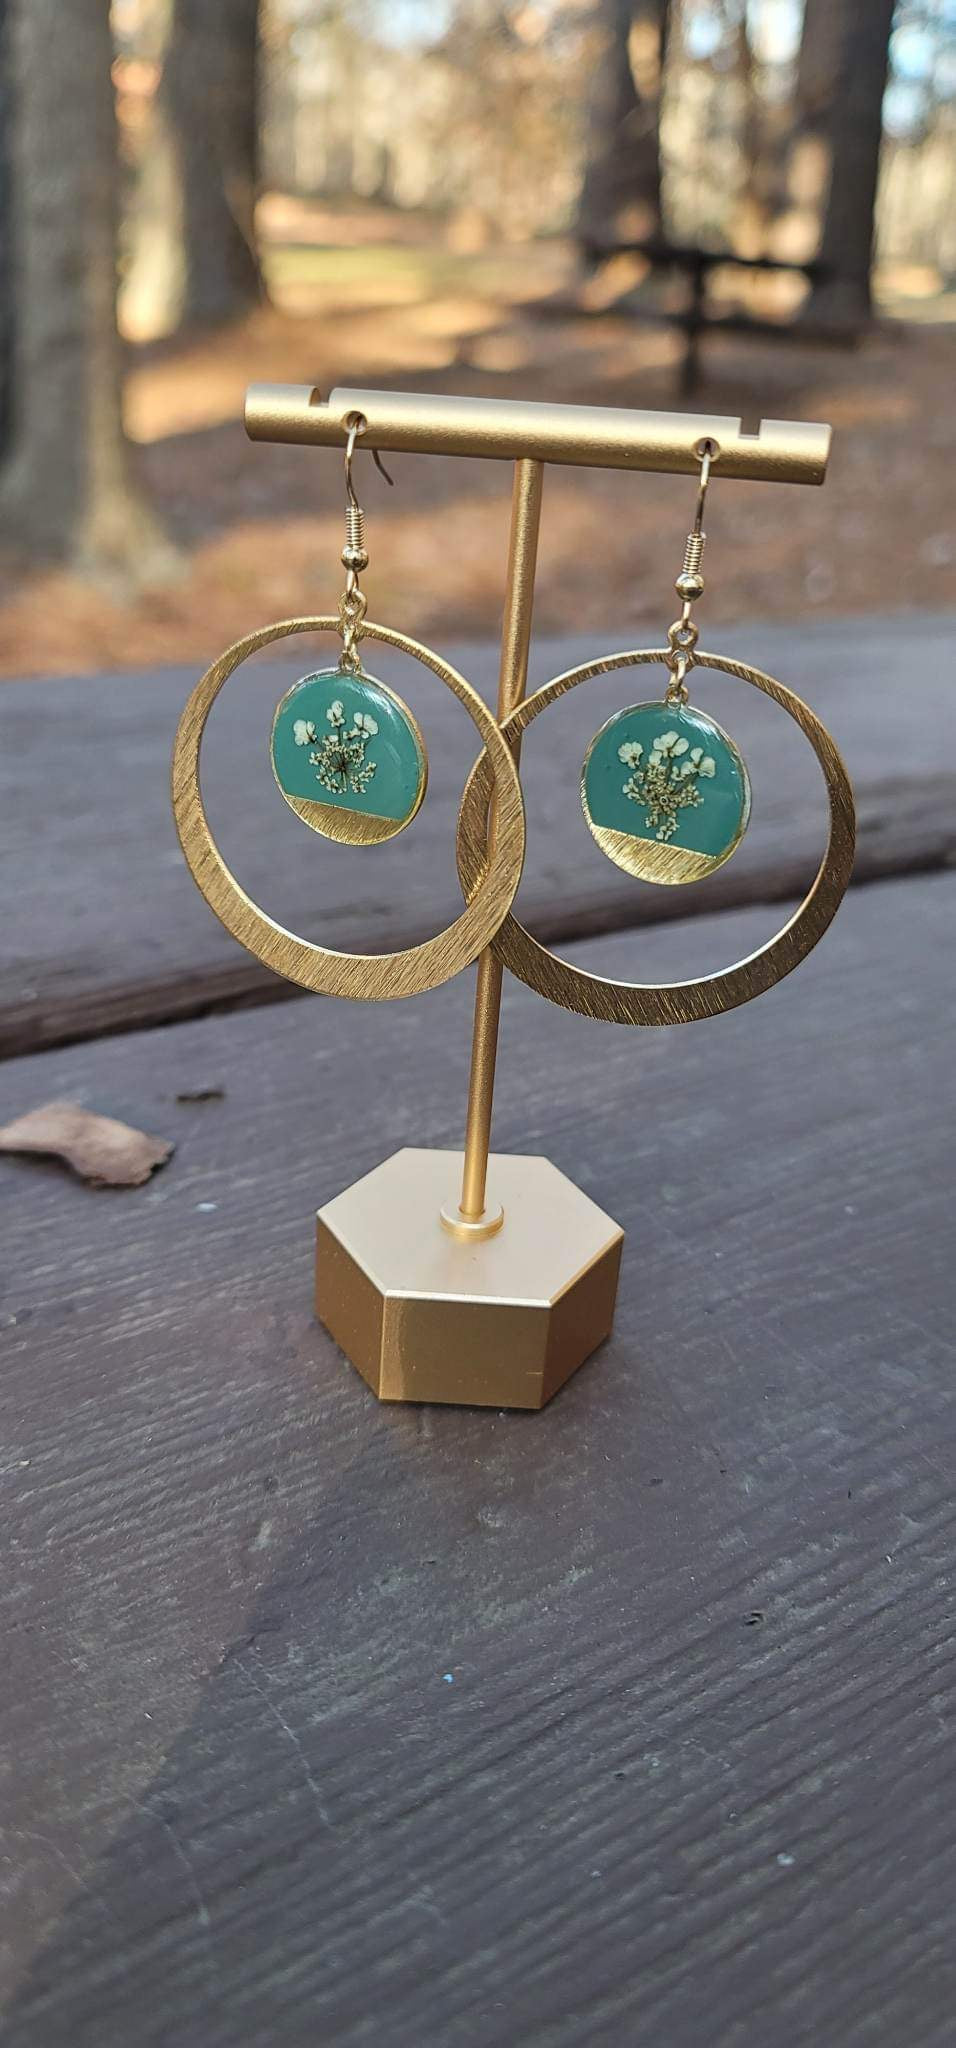 Teal Queen Anne’s Lace Hoops